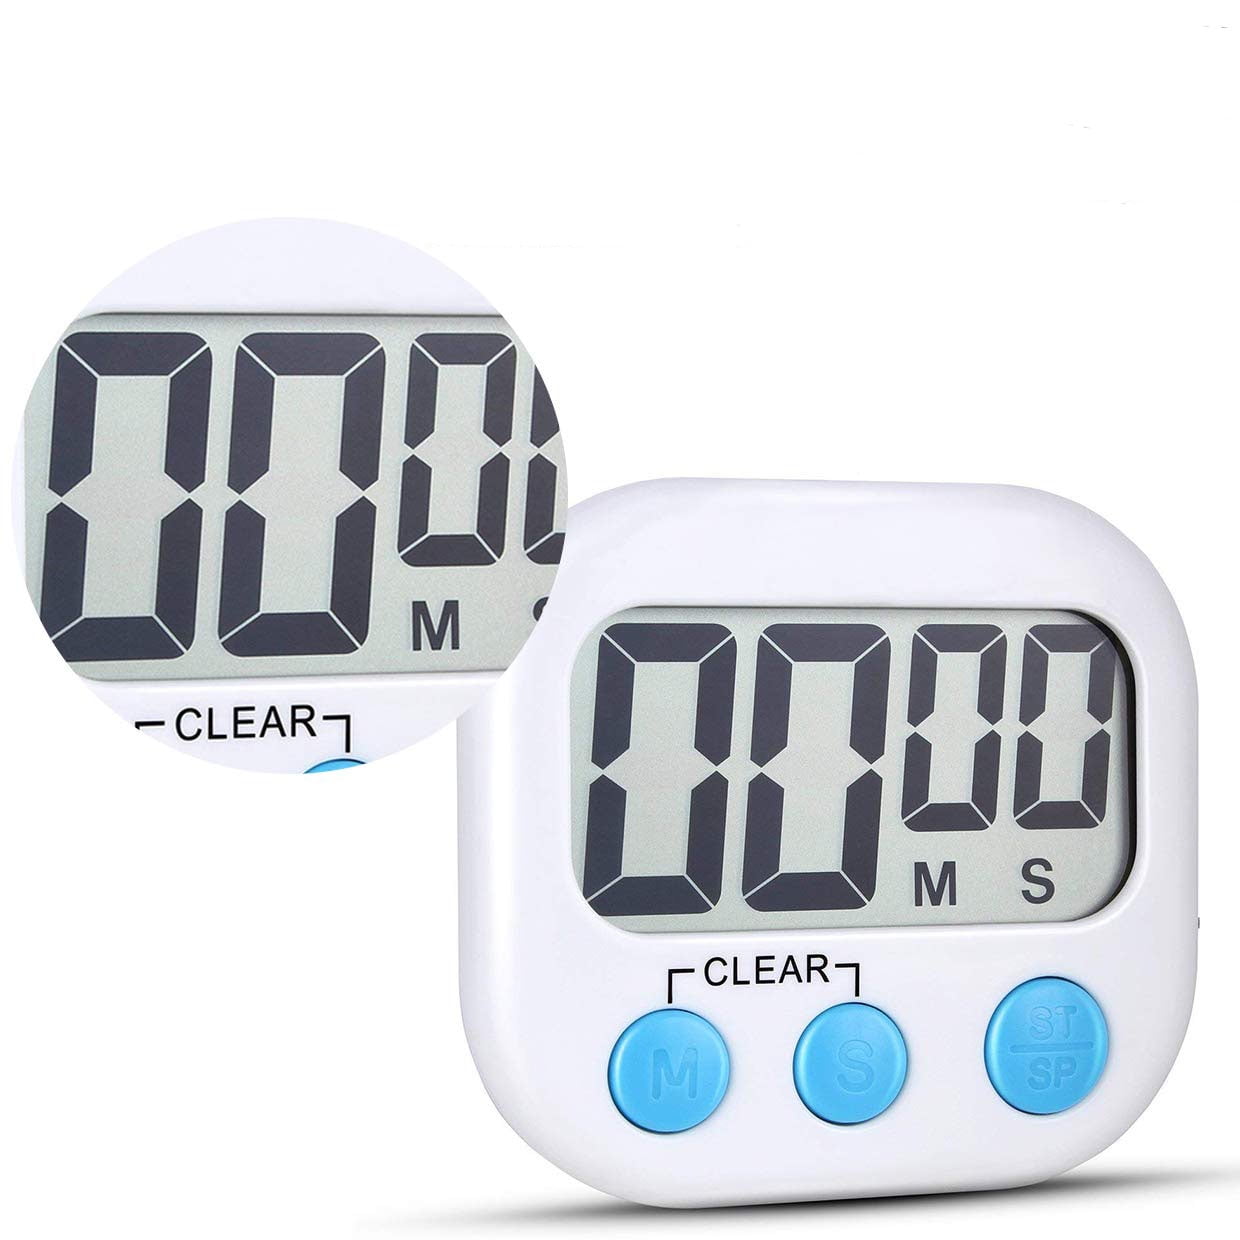 12 Pack Digital Kitchen Timer Classroom Small Timers for Teacher Homework Cooking Strong Magnetic Loud Alarm ON/OFF Switch White 